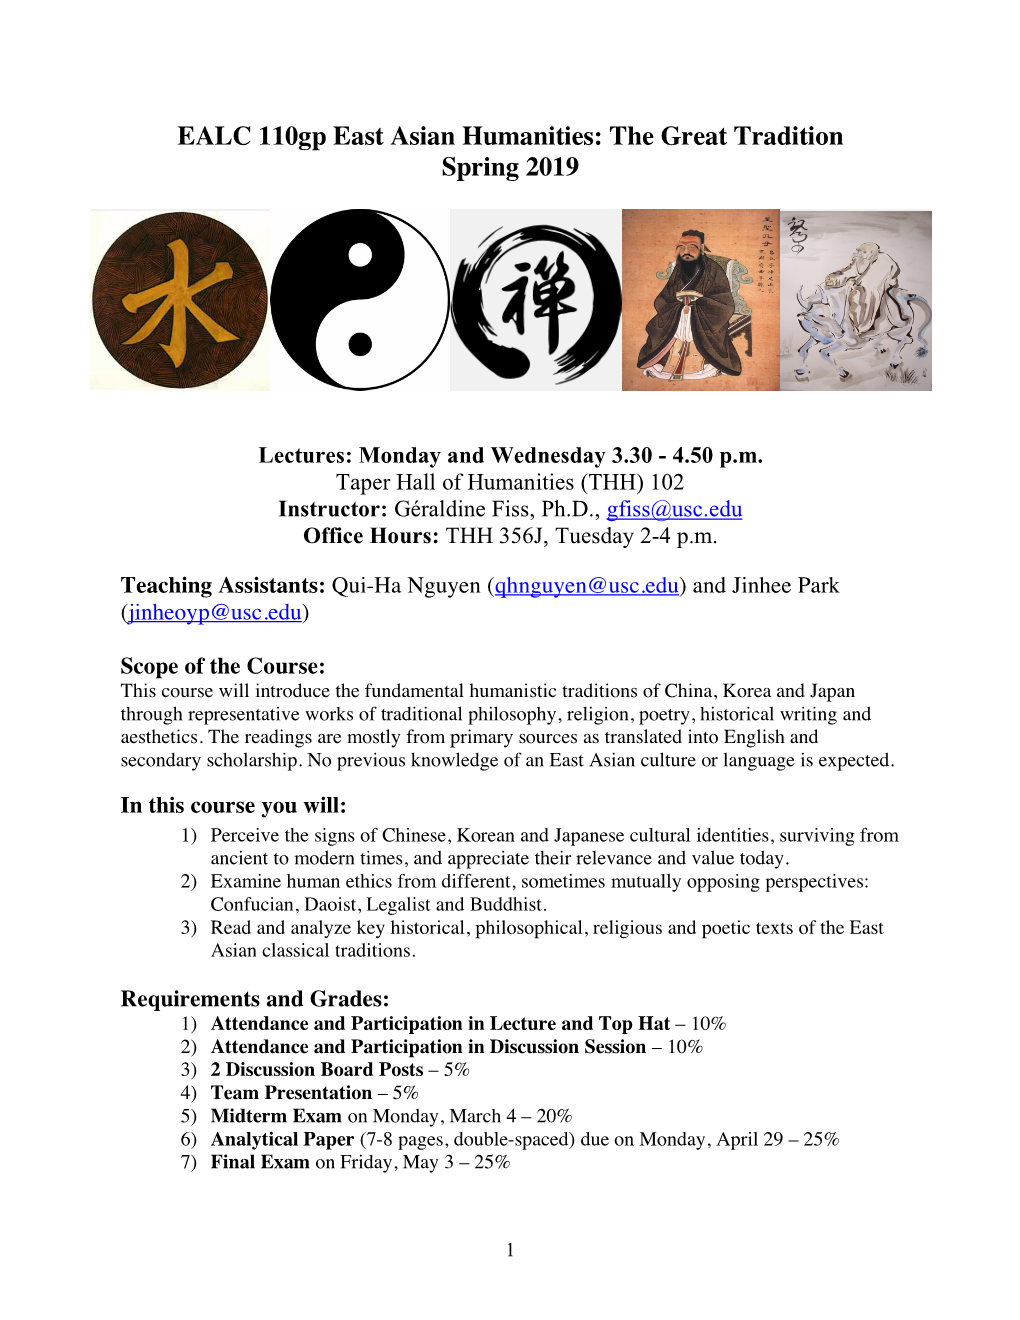 EALC 110Gp East Asian Humanities: the Great Tradition Spring 2019